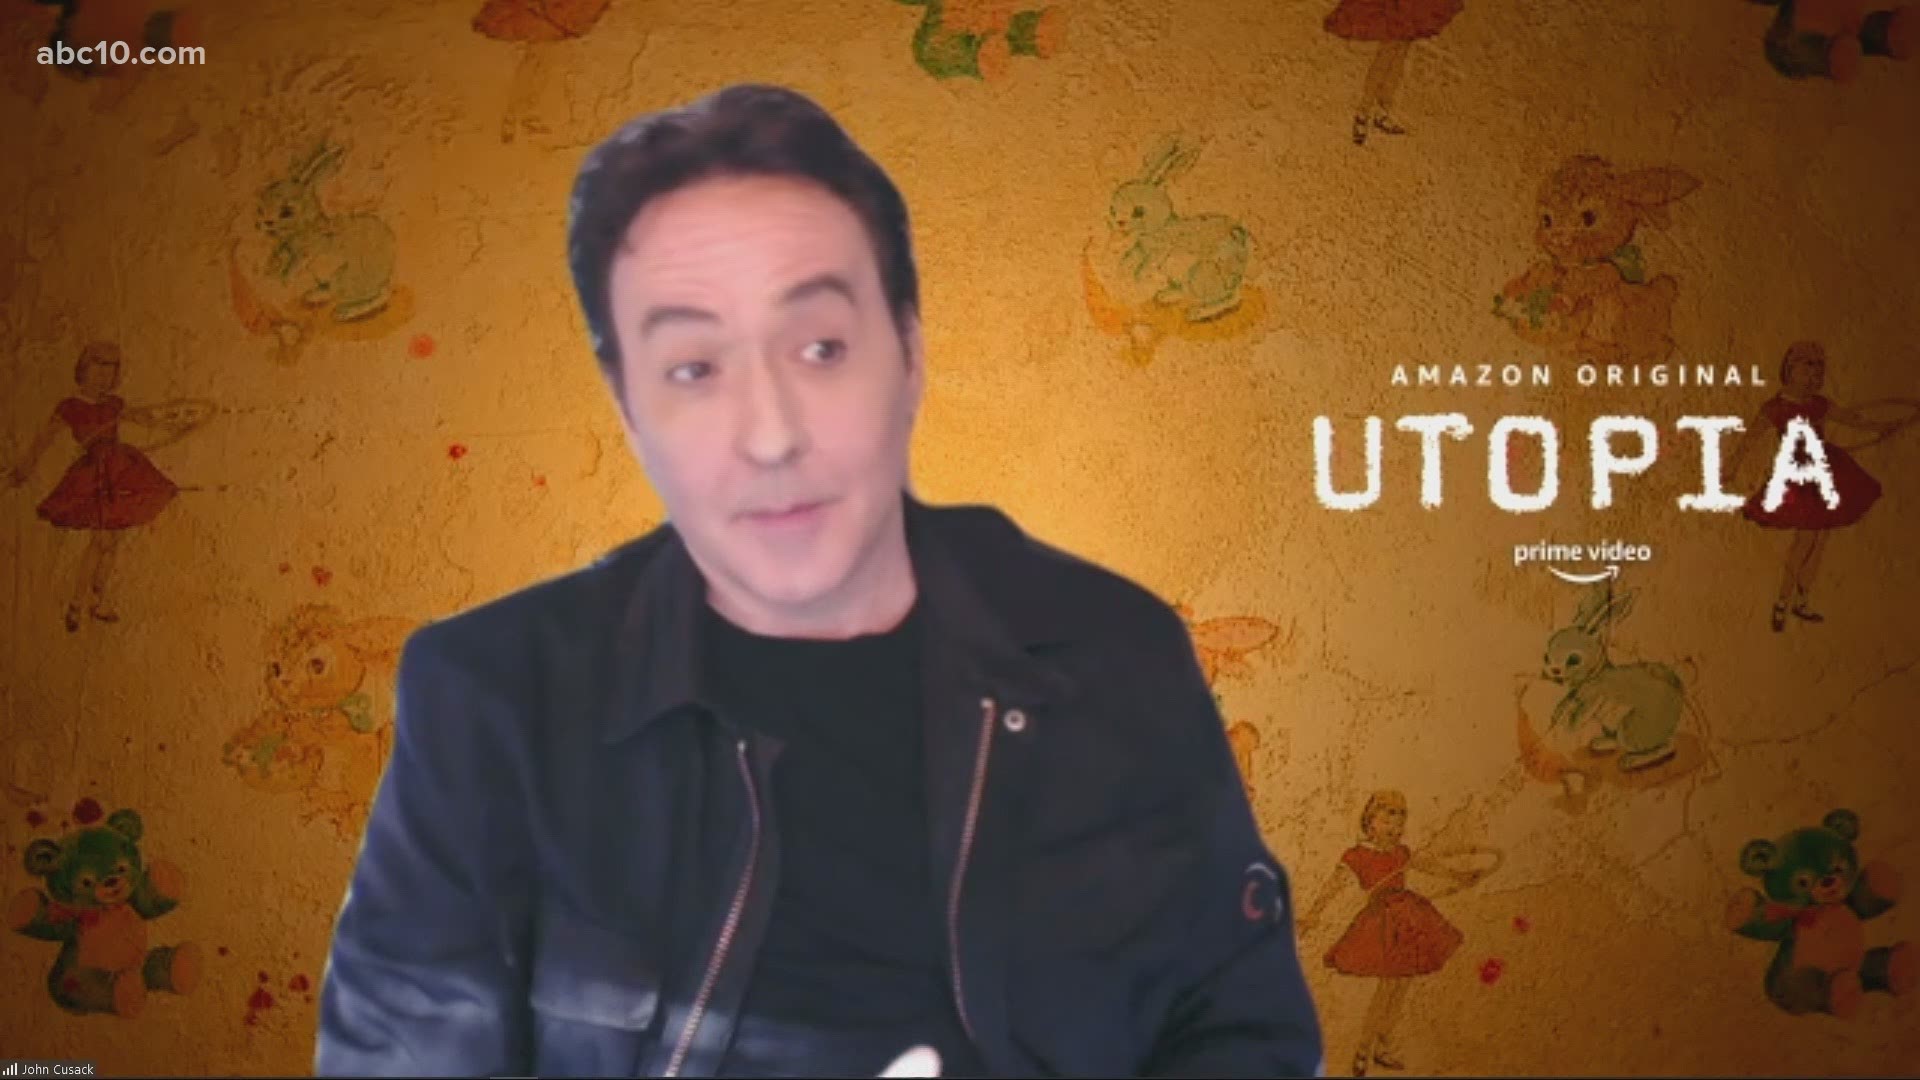 John Cusack talks with Mark S. Allen about 'Utopia' coming to Prime Video.